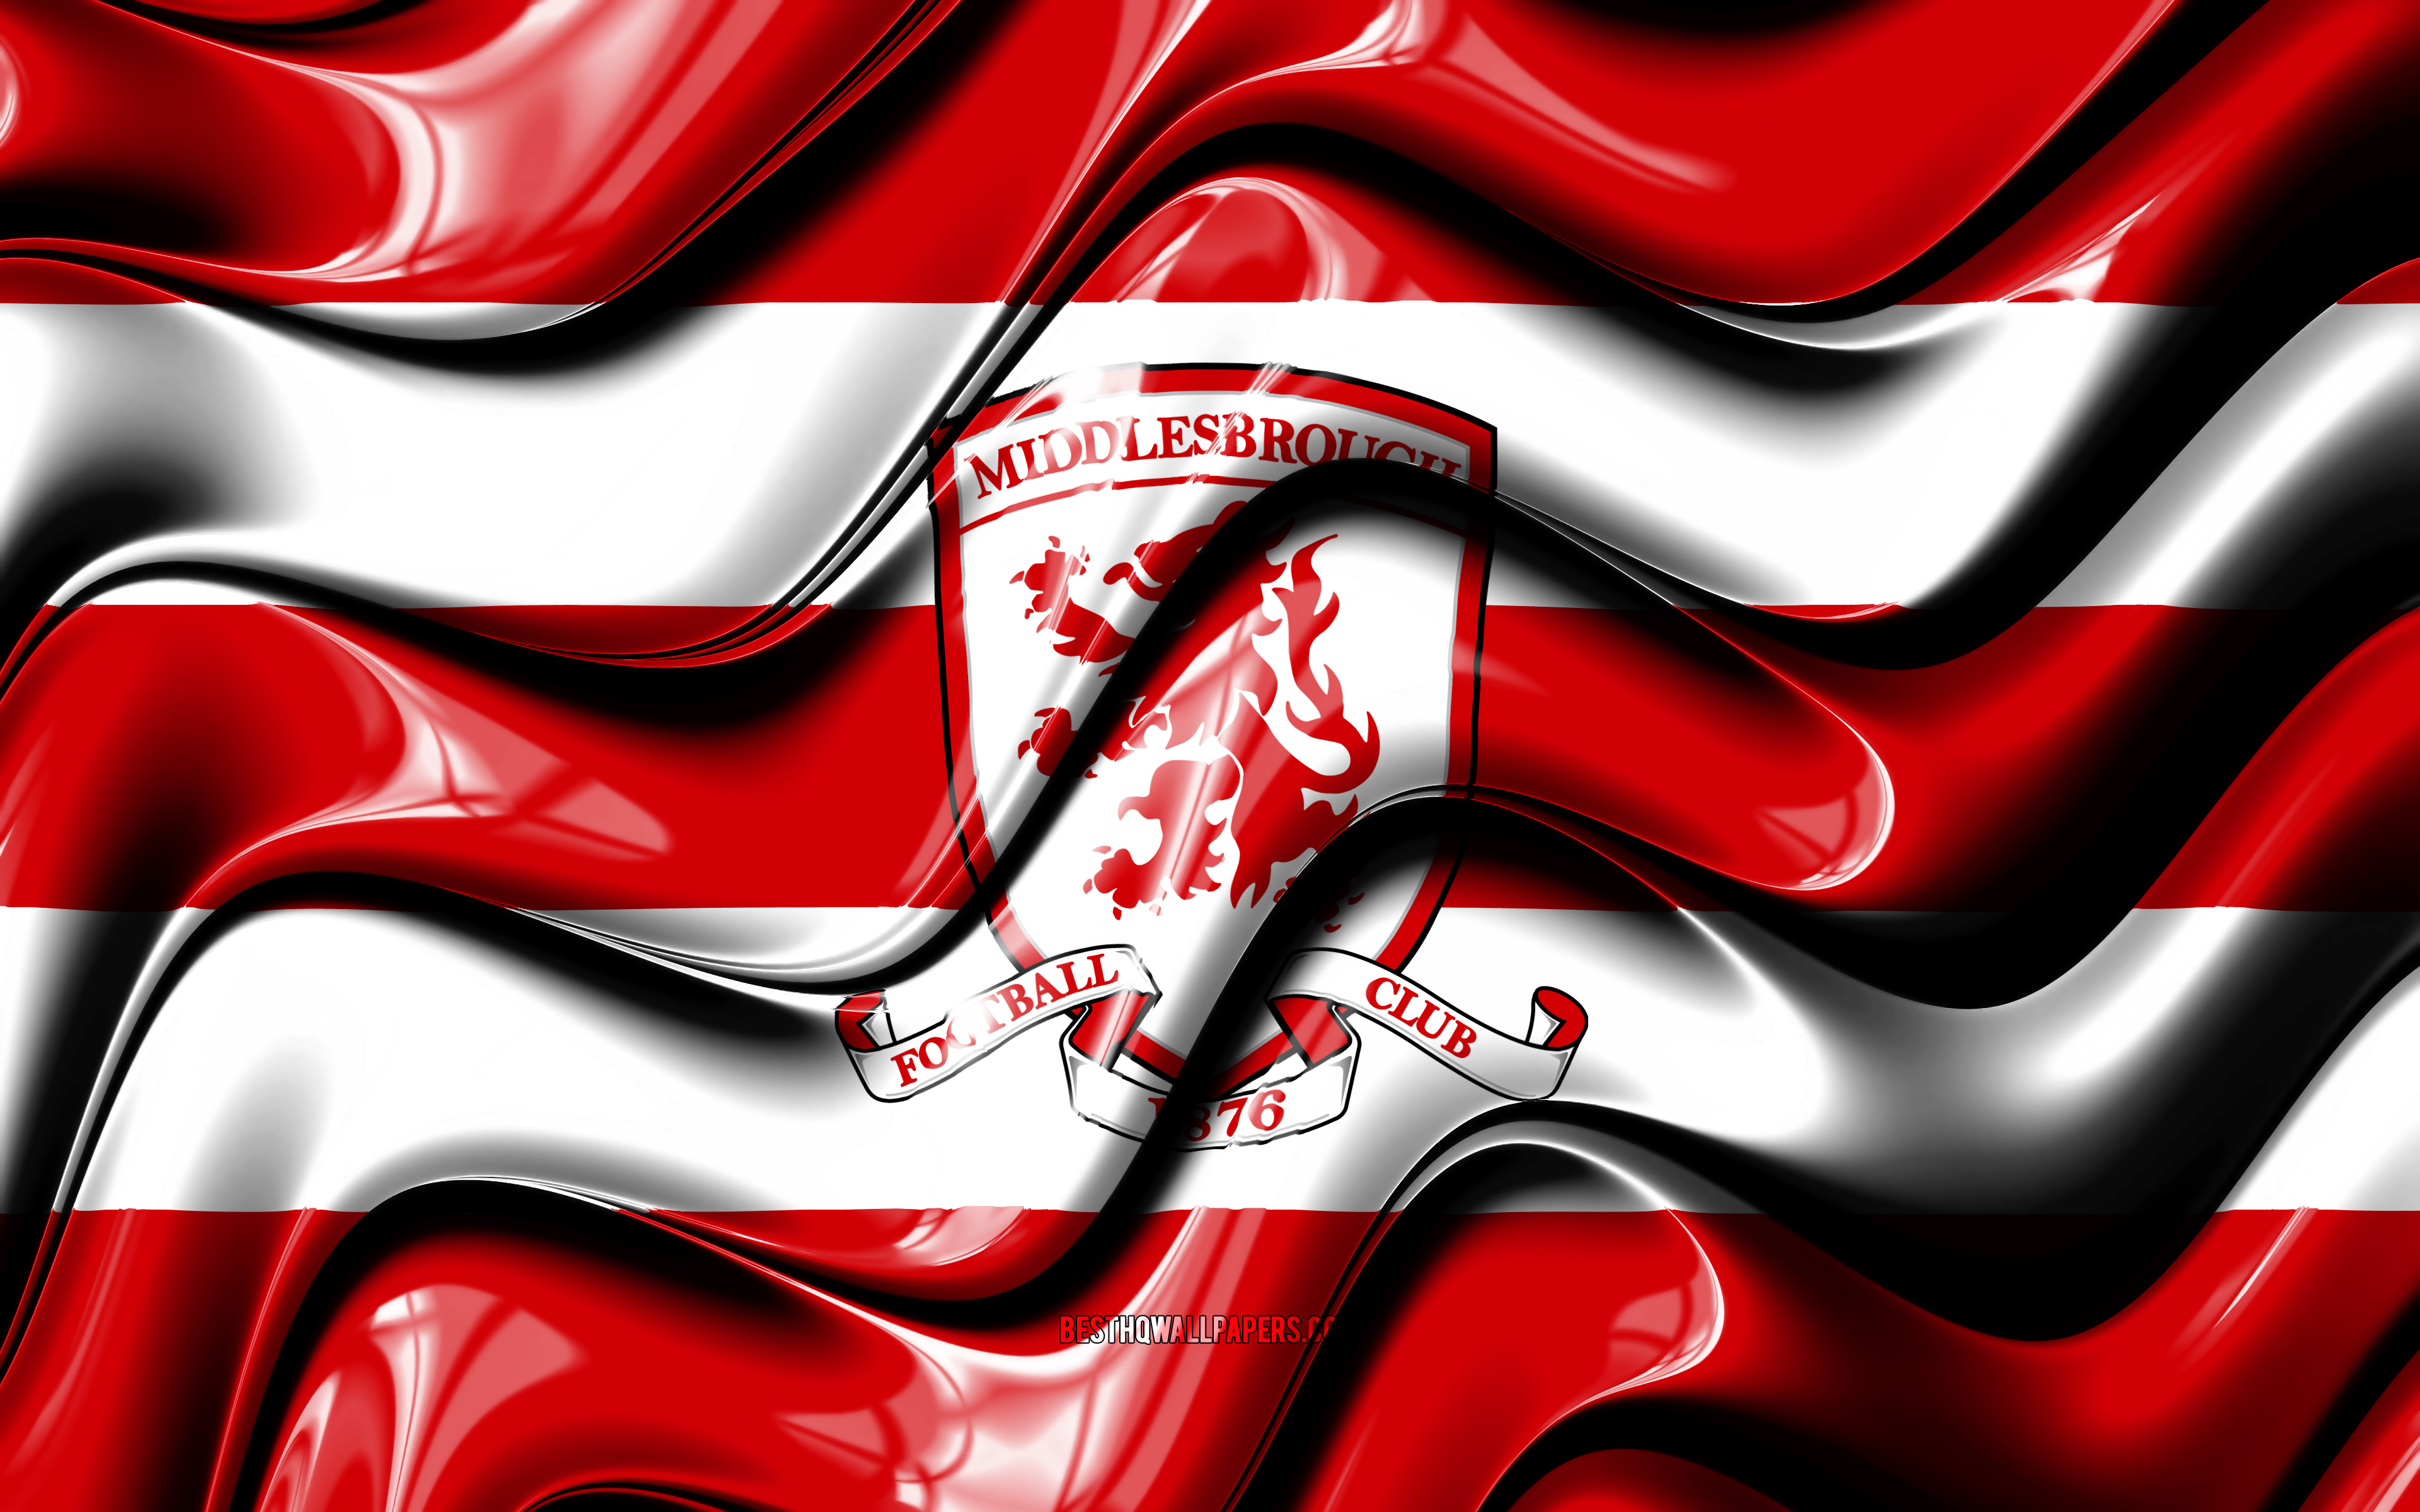 Download wallpaper Middlesbrough flag, 4k, red and white 3D waves, EFL Championship, english football club, football, Middlesbrough logo, Middlesbrough FC, soccer, FC Middlesbrough for desktop with resolution 3840x2400. High Quality HD picture